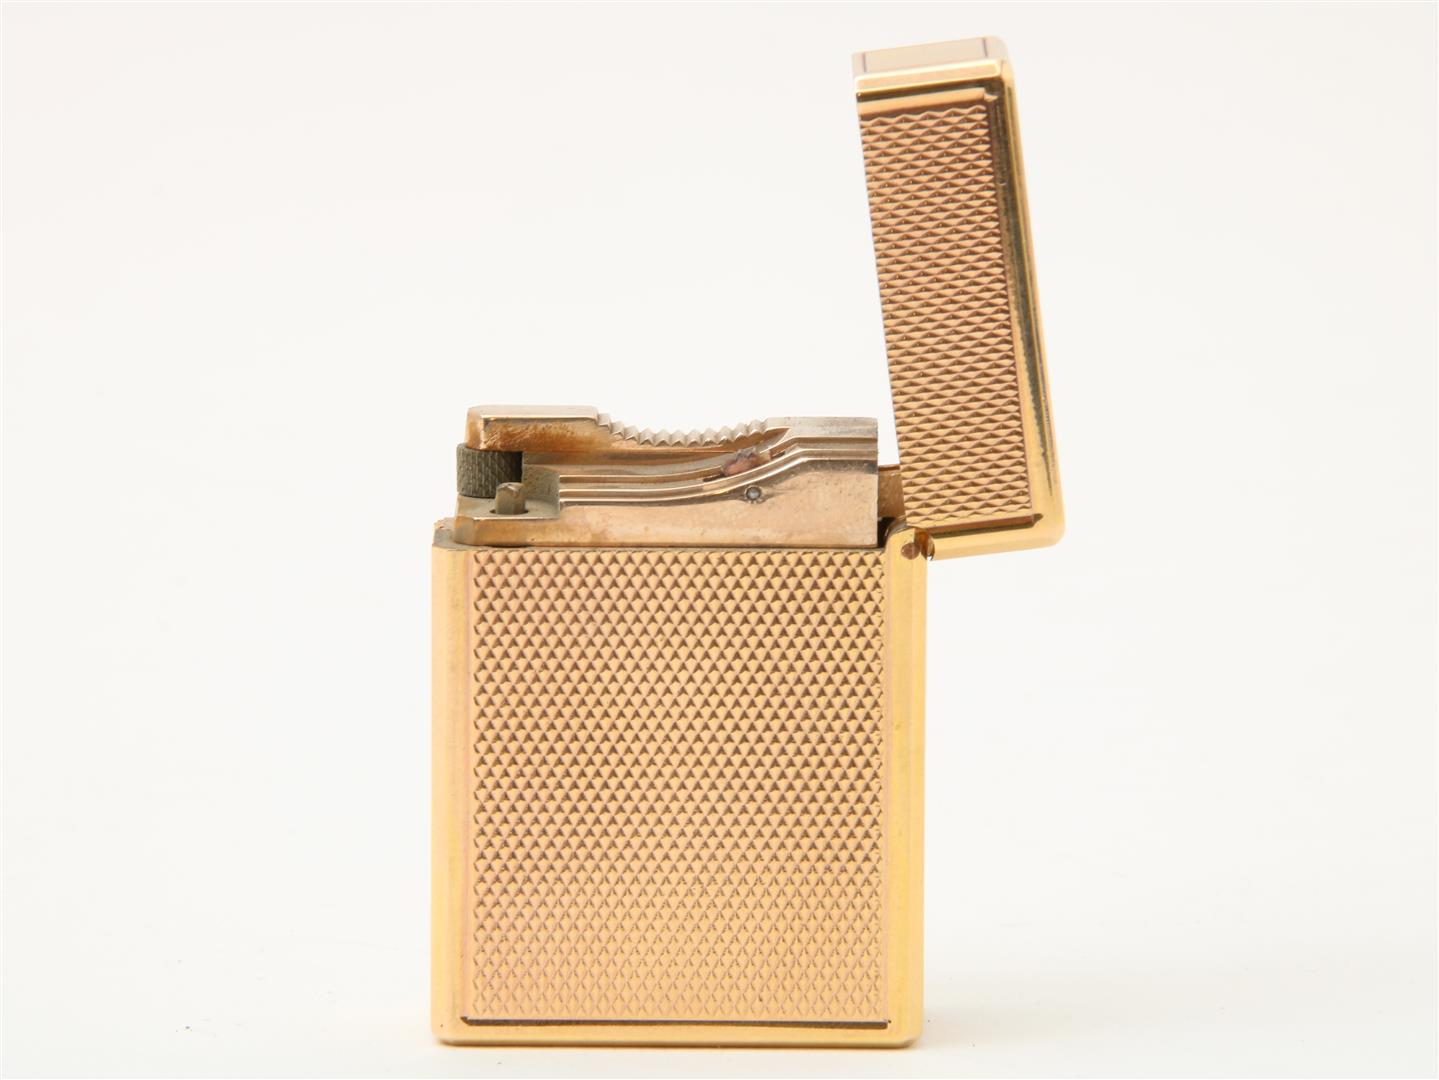 Gold-plated lighter, S.T. Dupont, in original box, numbered BG7361, height 4.8 cm. - Image 2 of 4